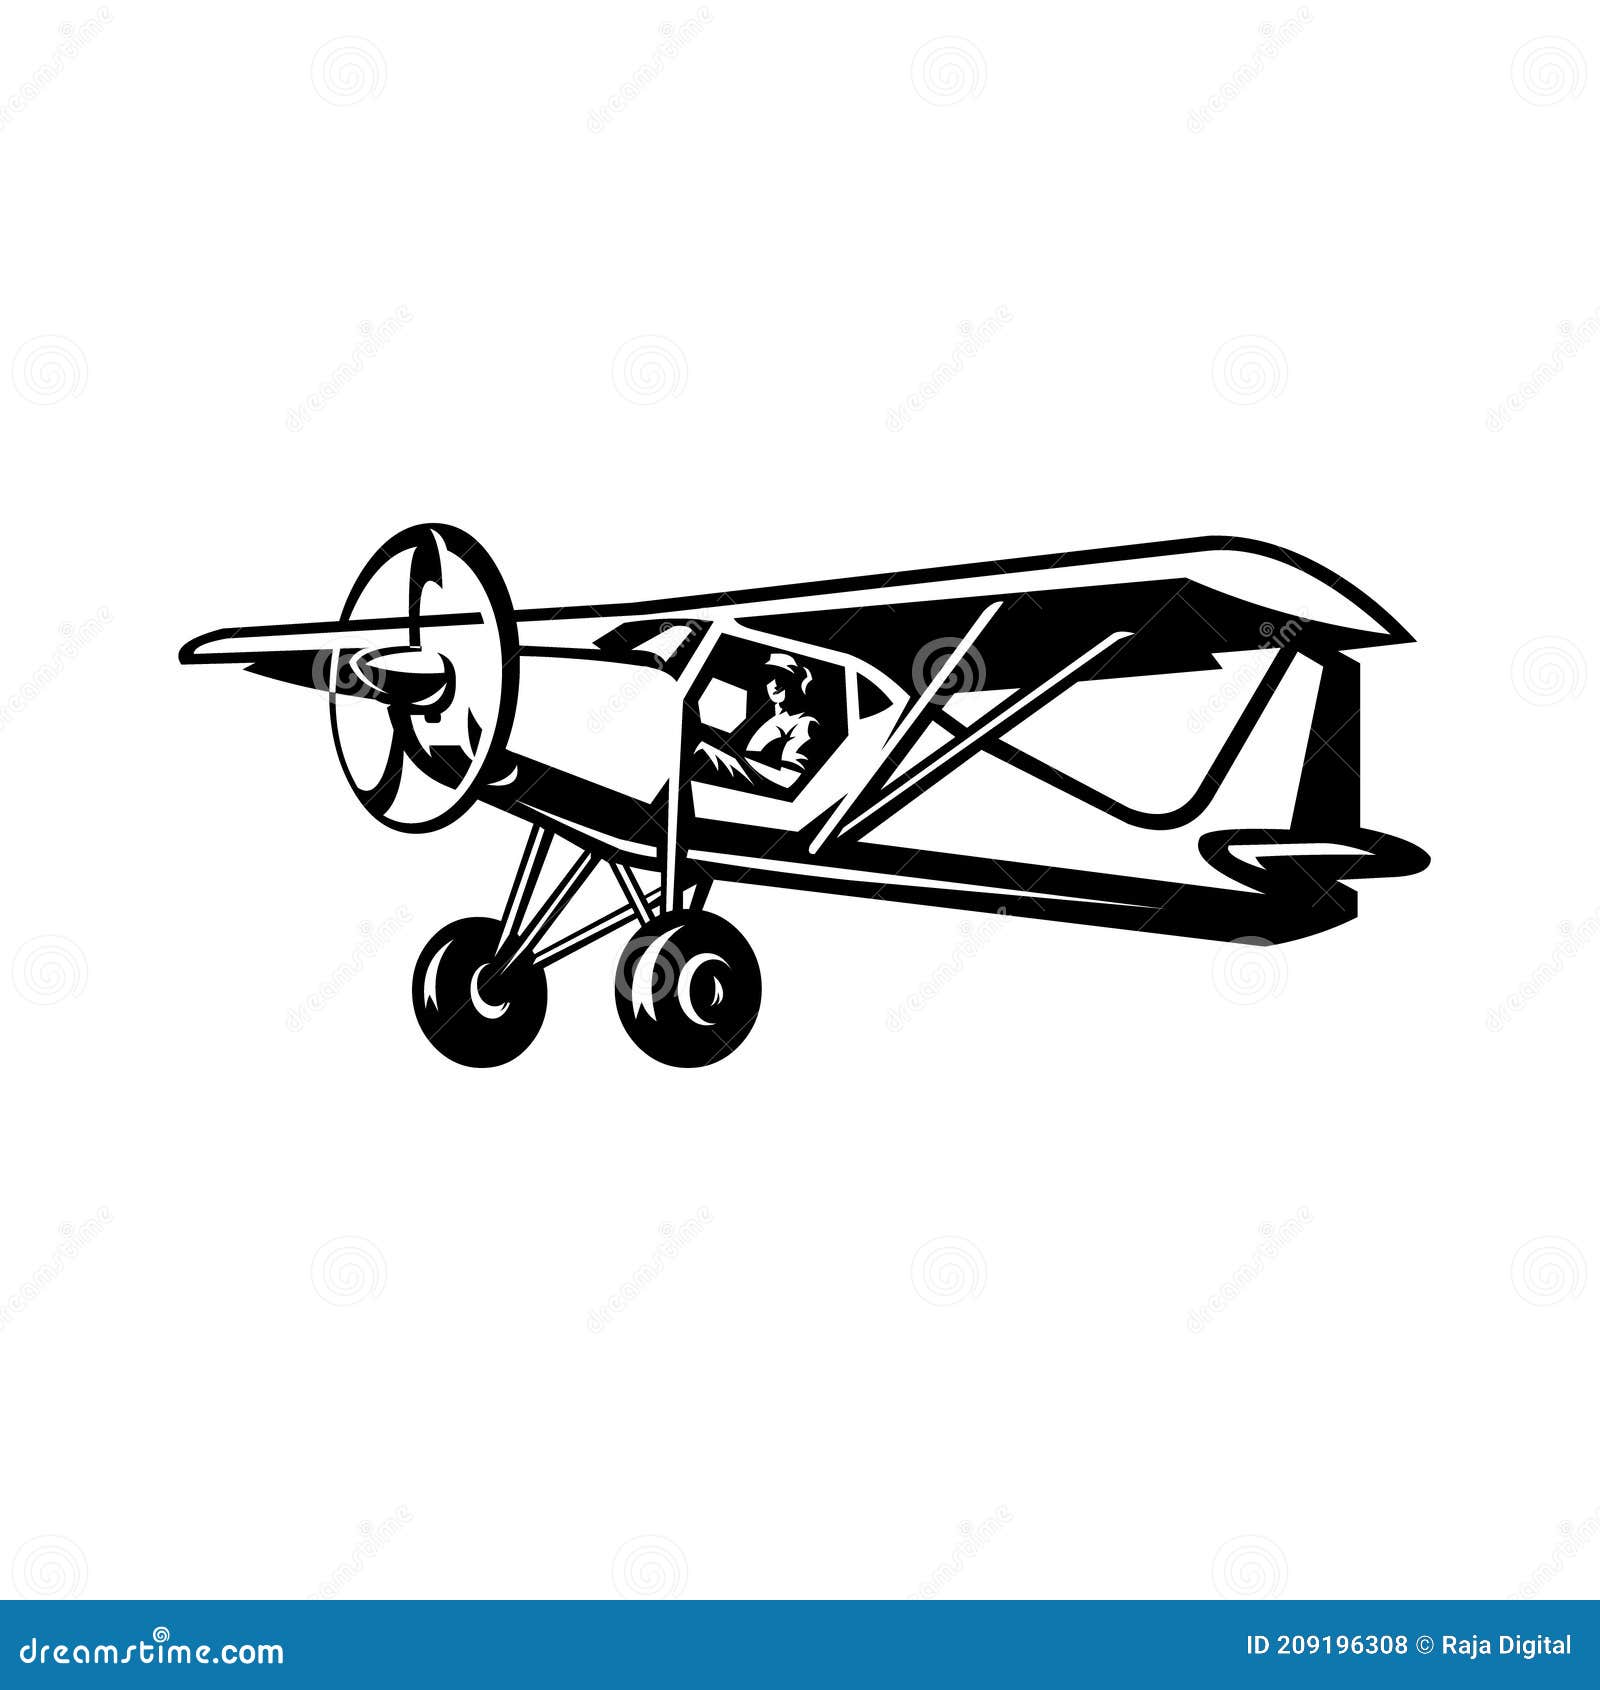 short takeoff and landing aircraft  small plane  stol airplane  